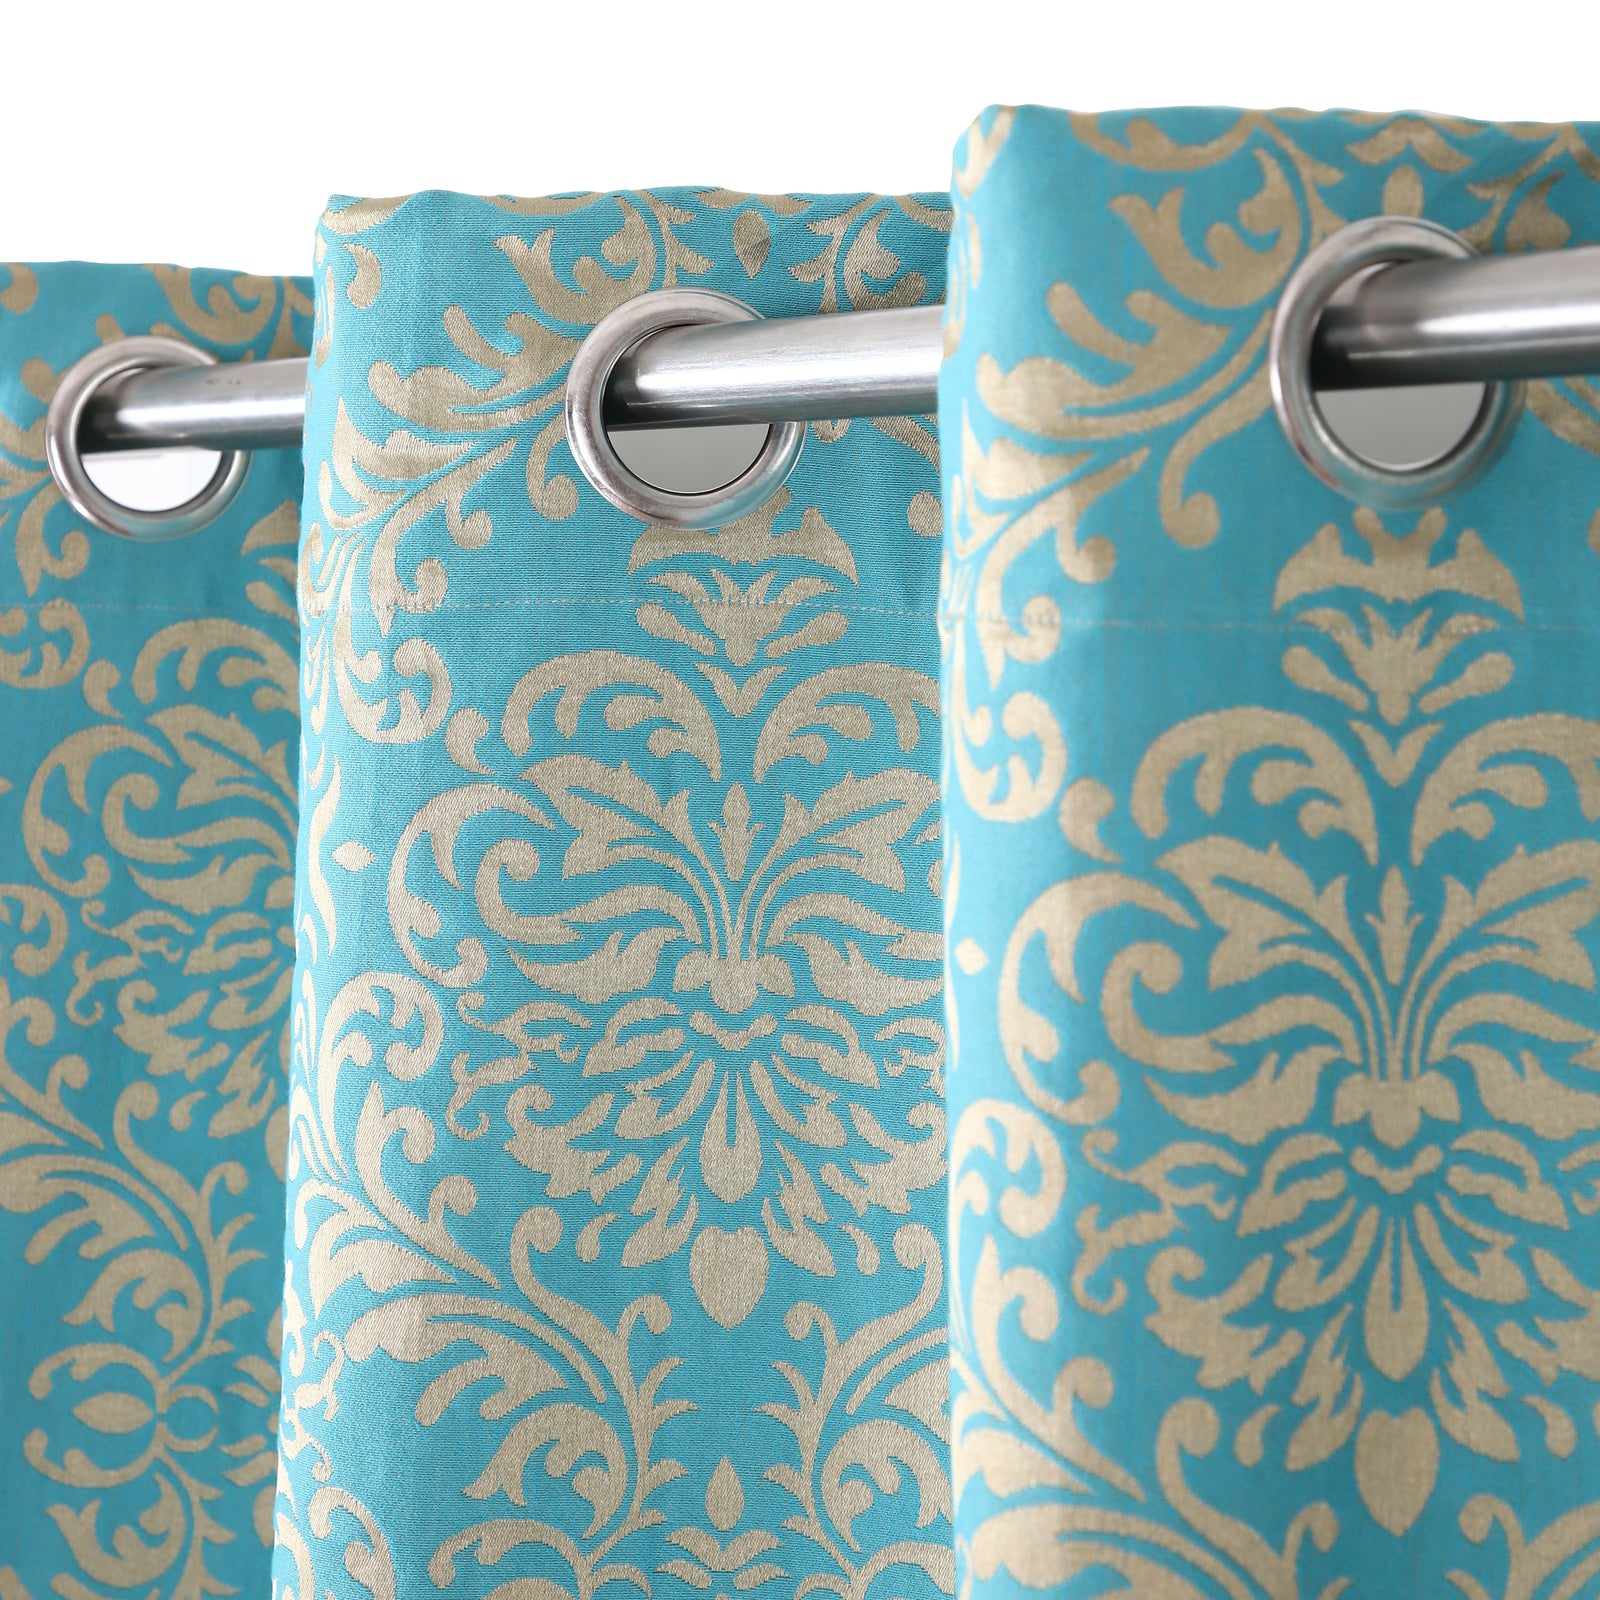 Cotton Jacquard Heavy Fabric Self Design Turquoise Curtain with Grommets